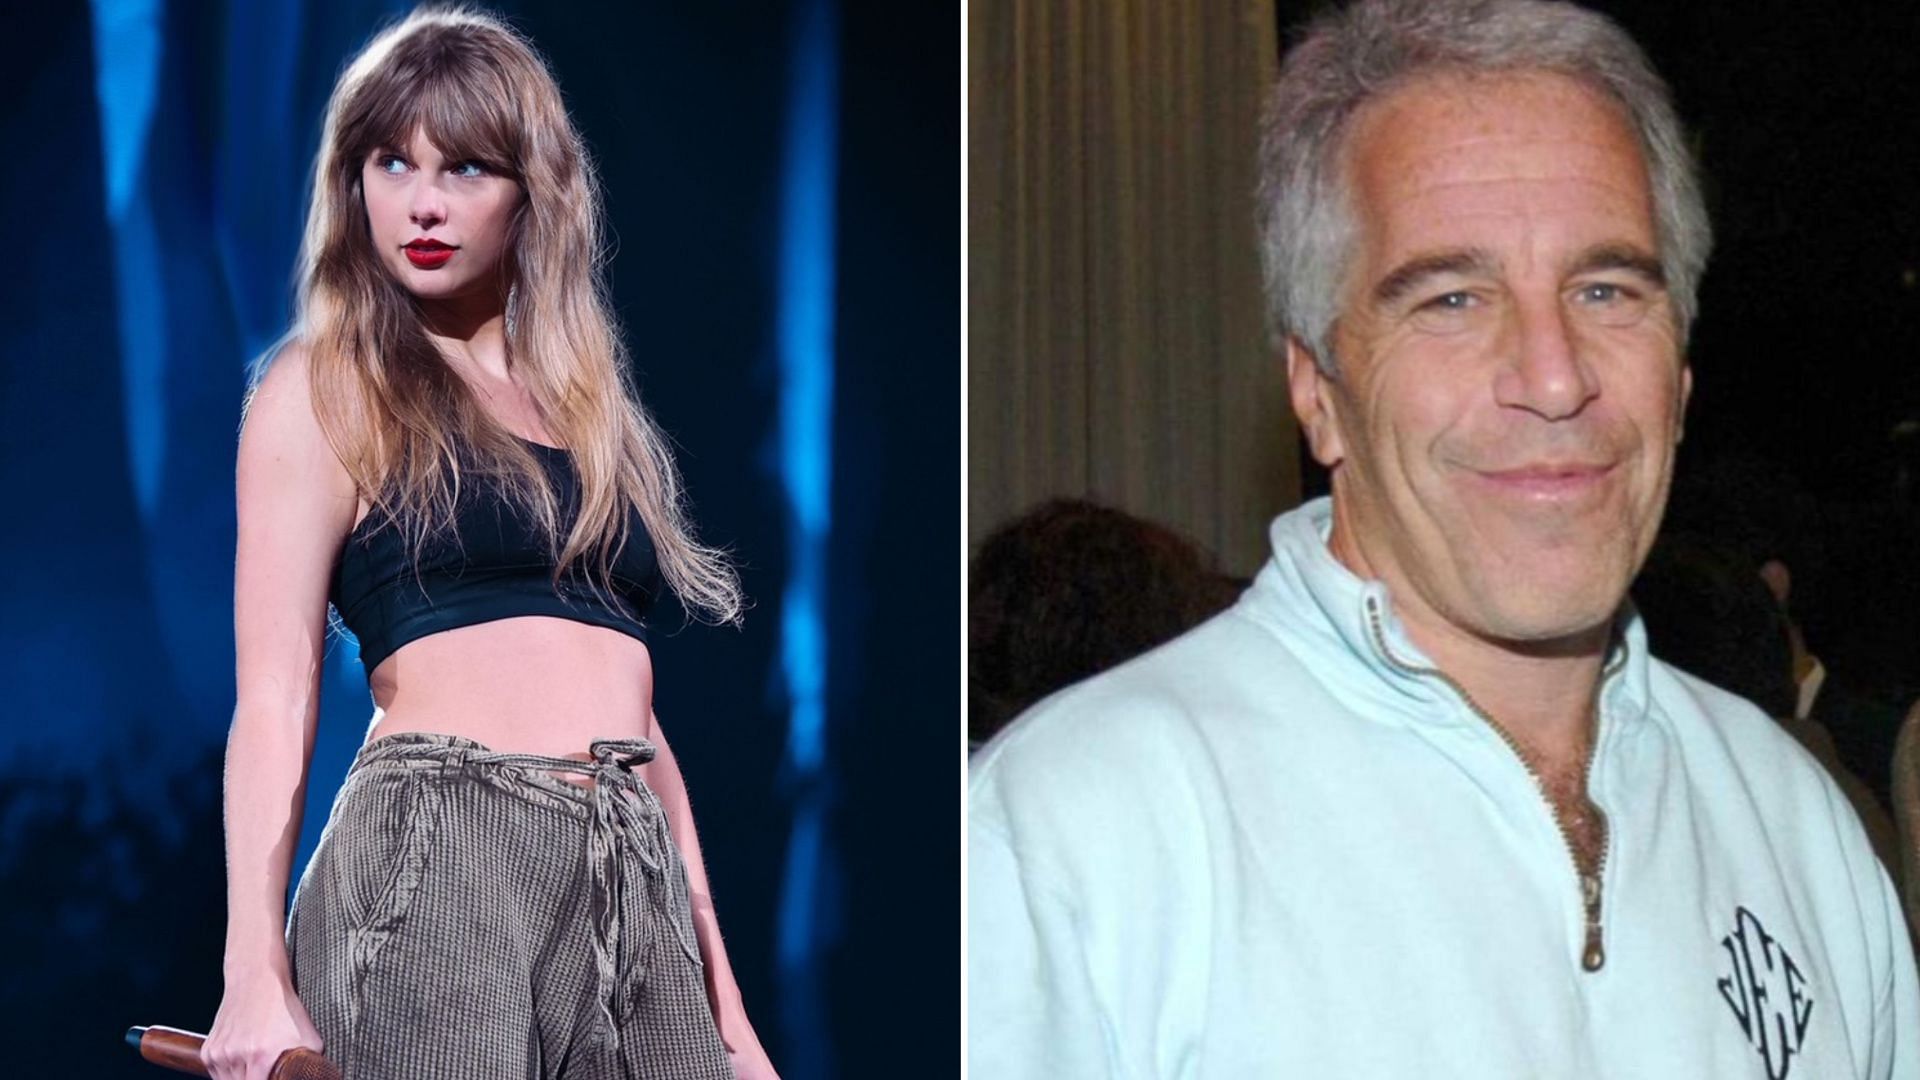 Contrary to what the image suggested, Swift was not with Epstein (Image via Facebook / Taylor Swift / Restoration of America)